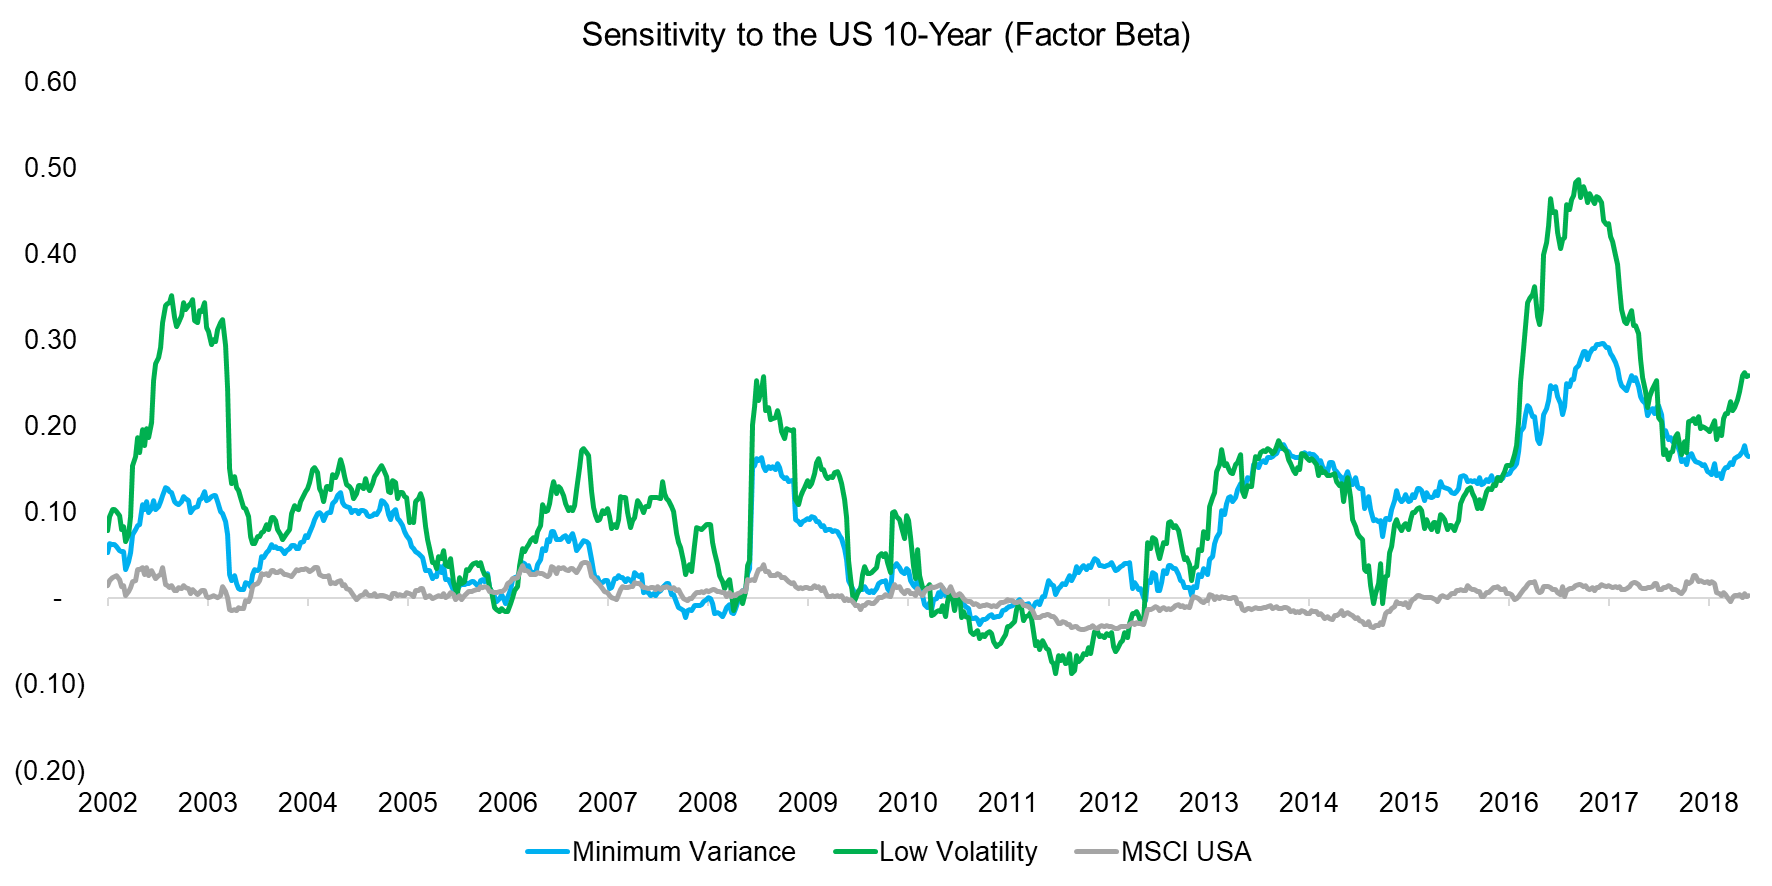 Sensitivity to the US 10-Year (Factor Beta)